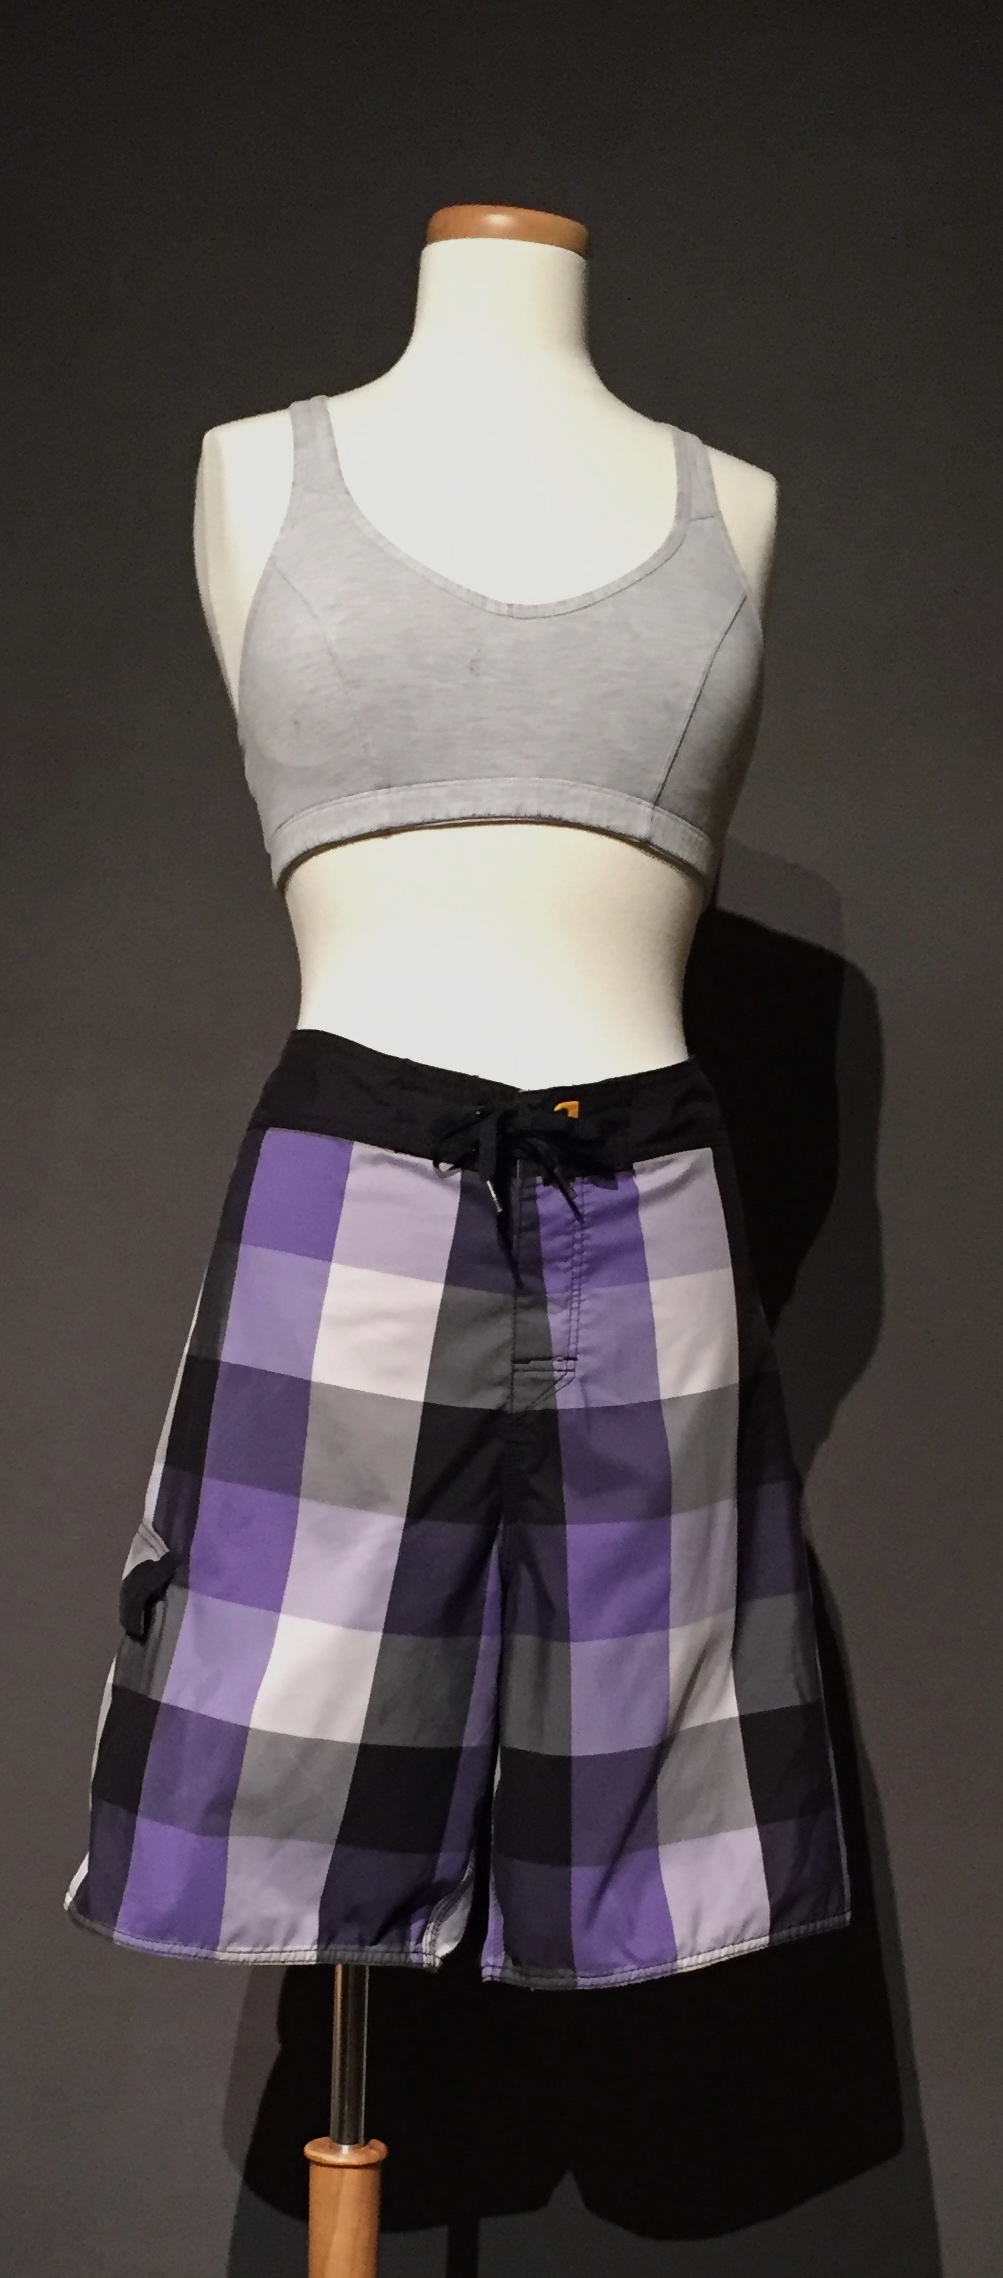 Purple and black plaid swim trunk paired with grey sports bra